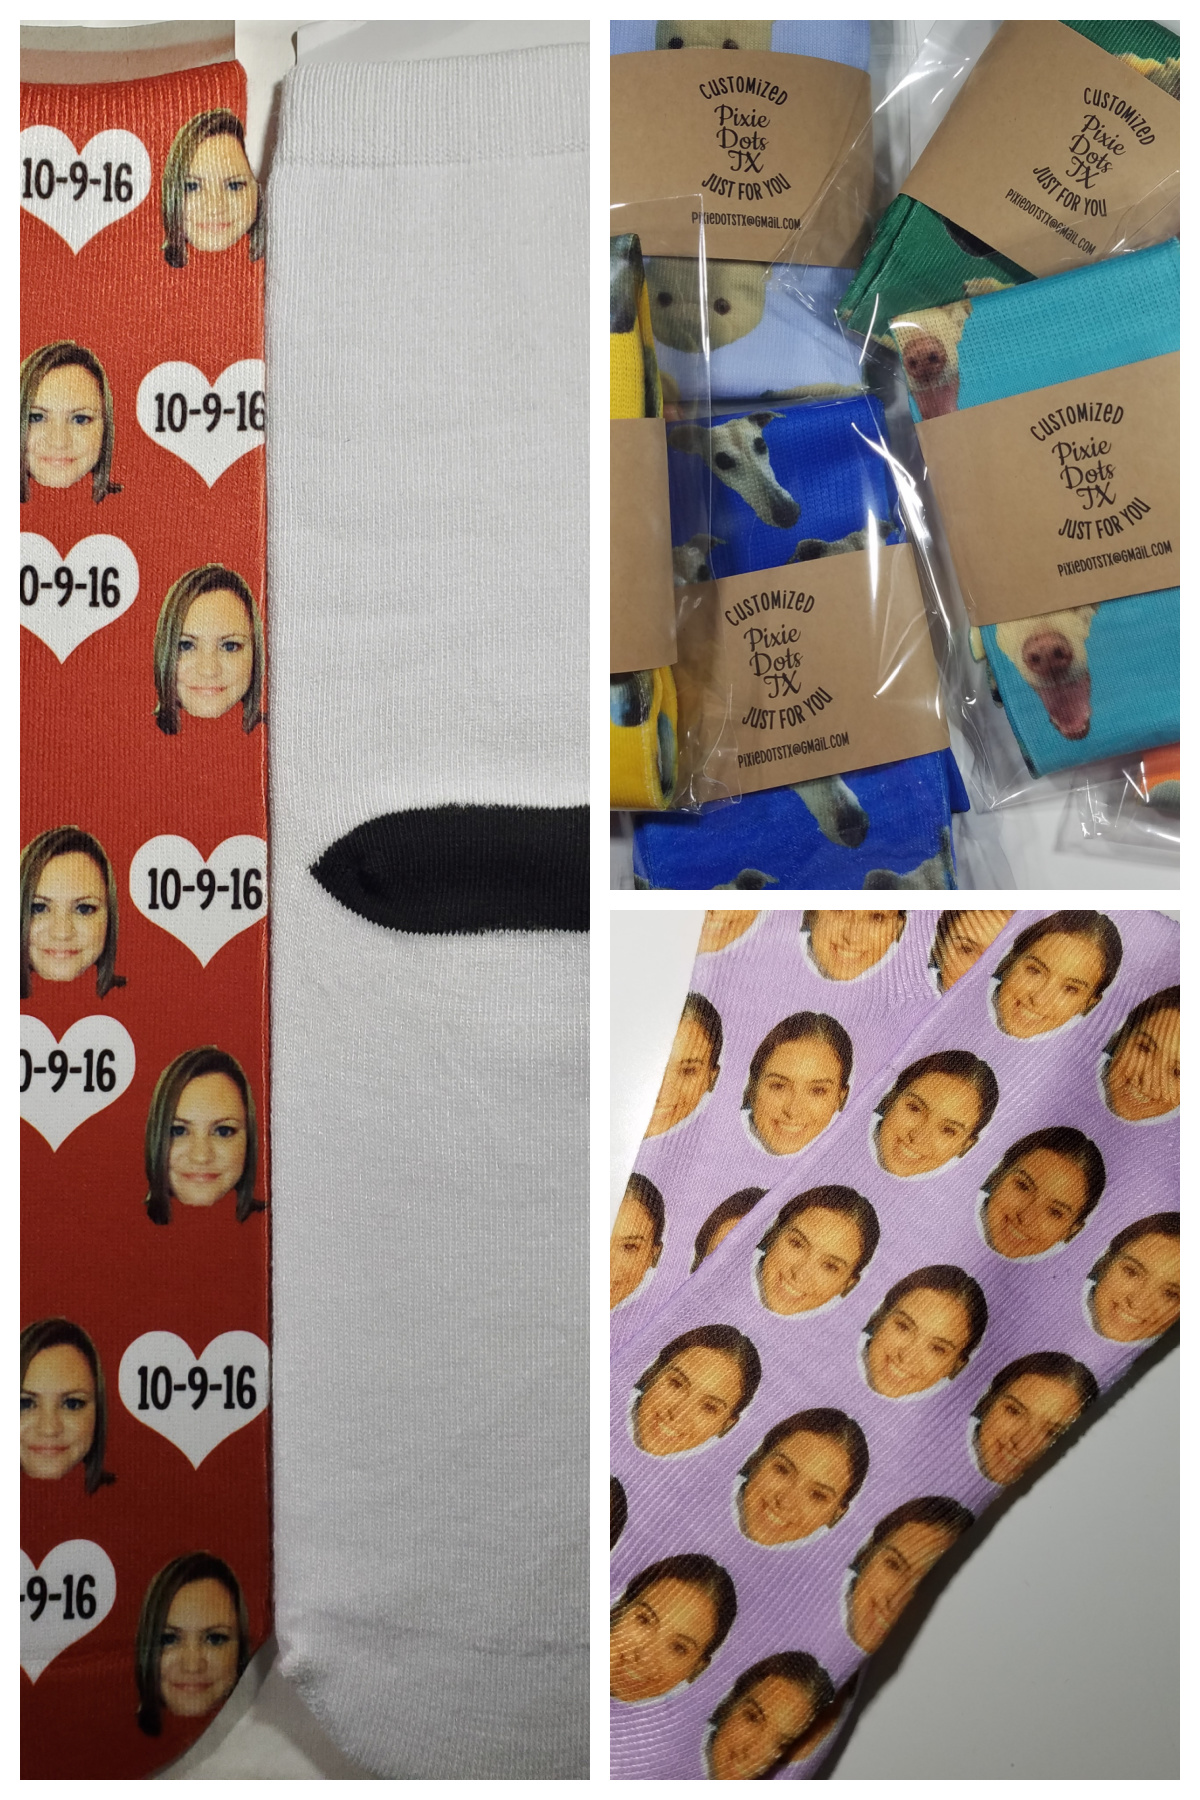 Personalized & customized socks with faces of family, friends & pets